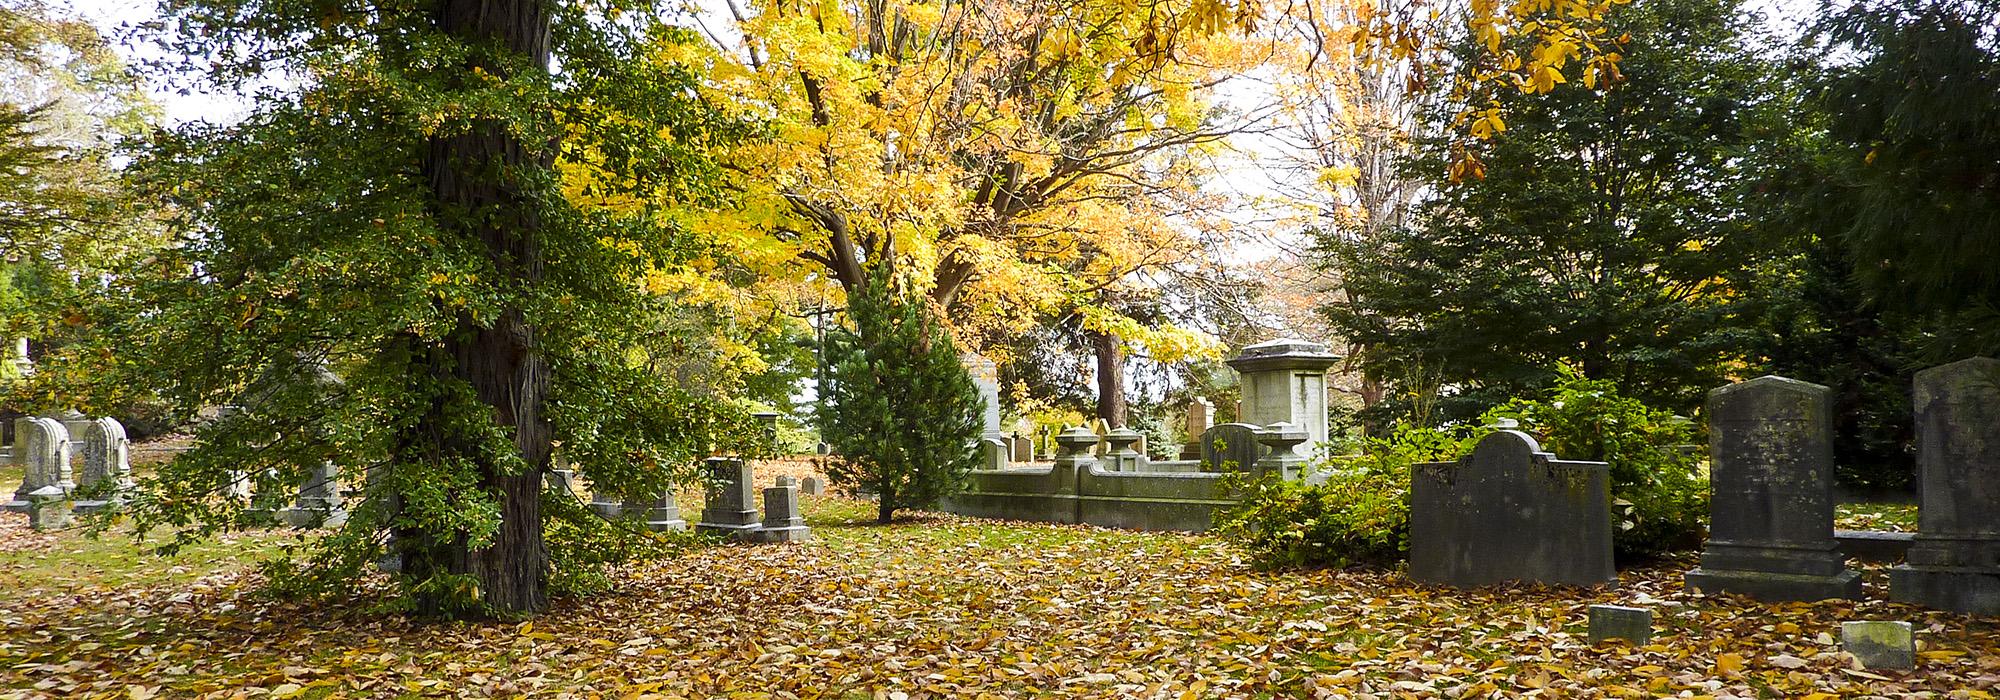 Forest Hills Cemetery, Boston, MA